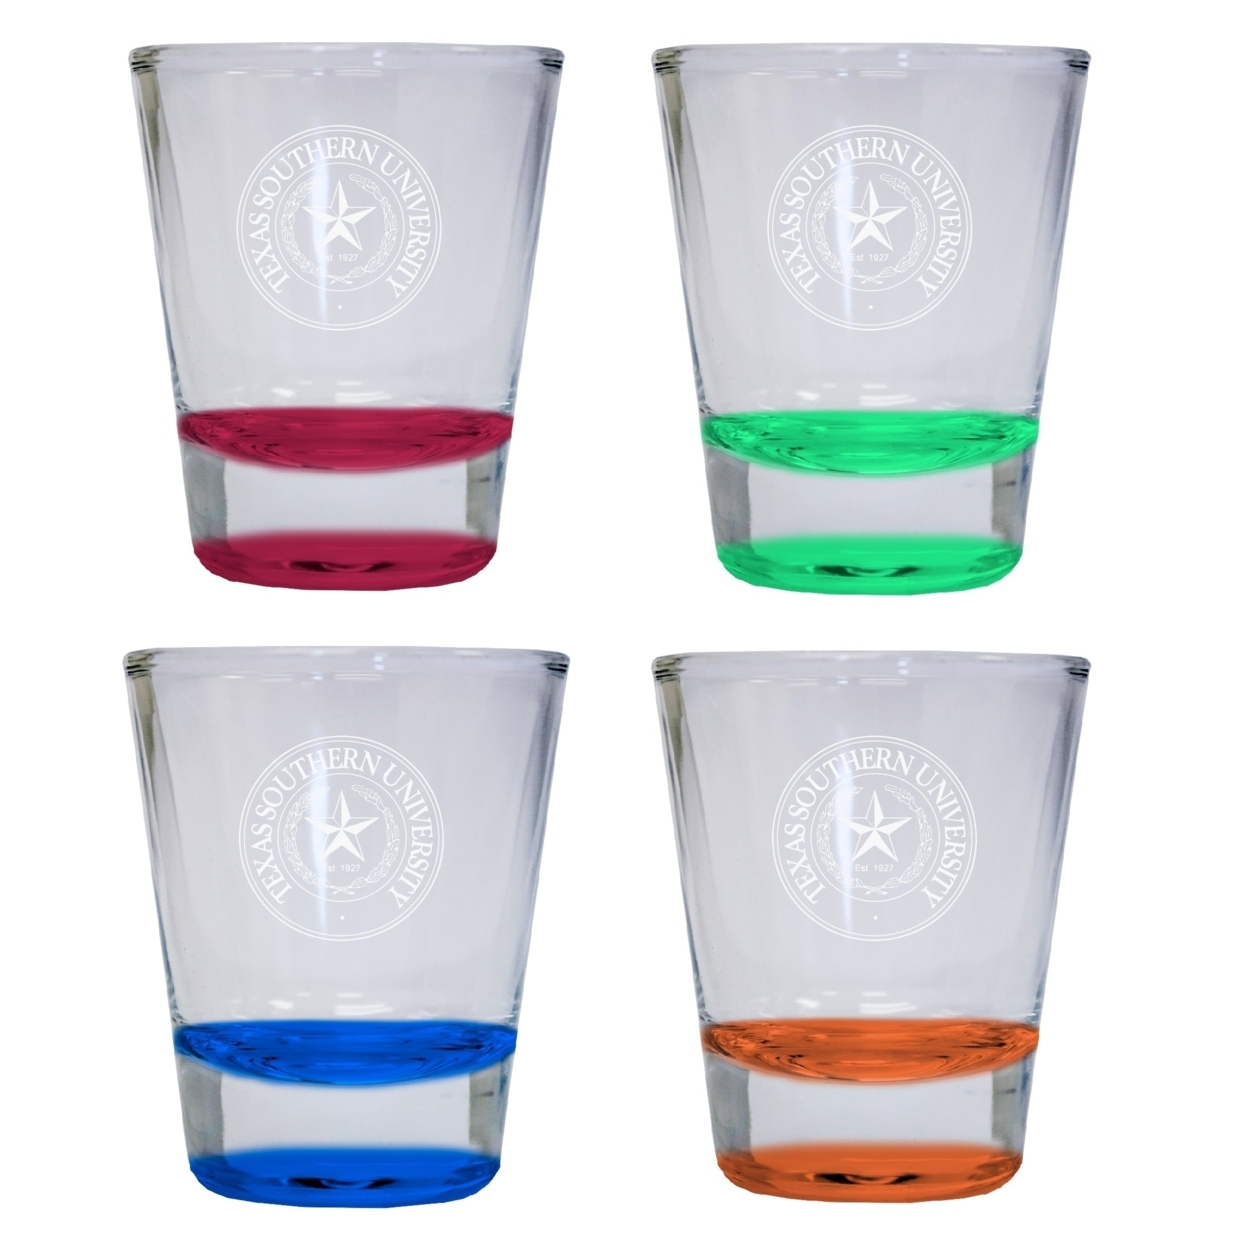 4-Pack Texas Southern University Etched Round Shot Glass 2 Oz